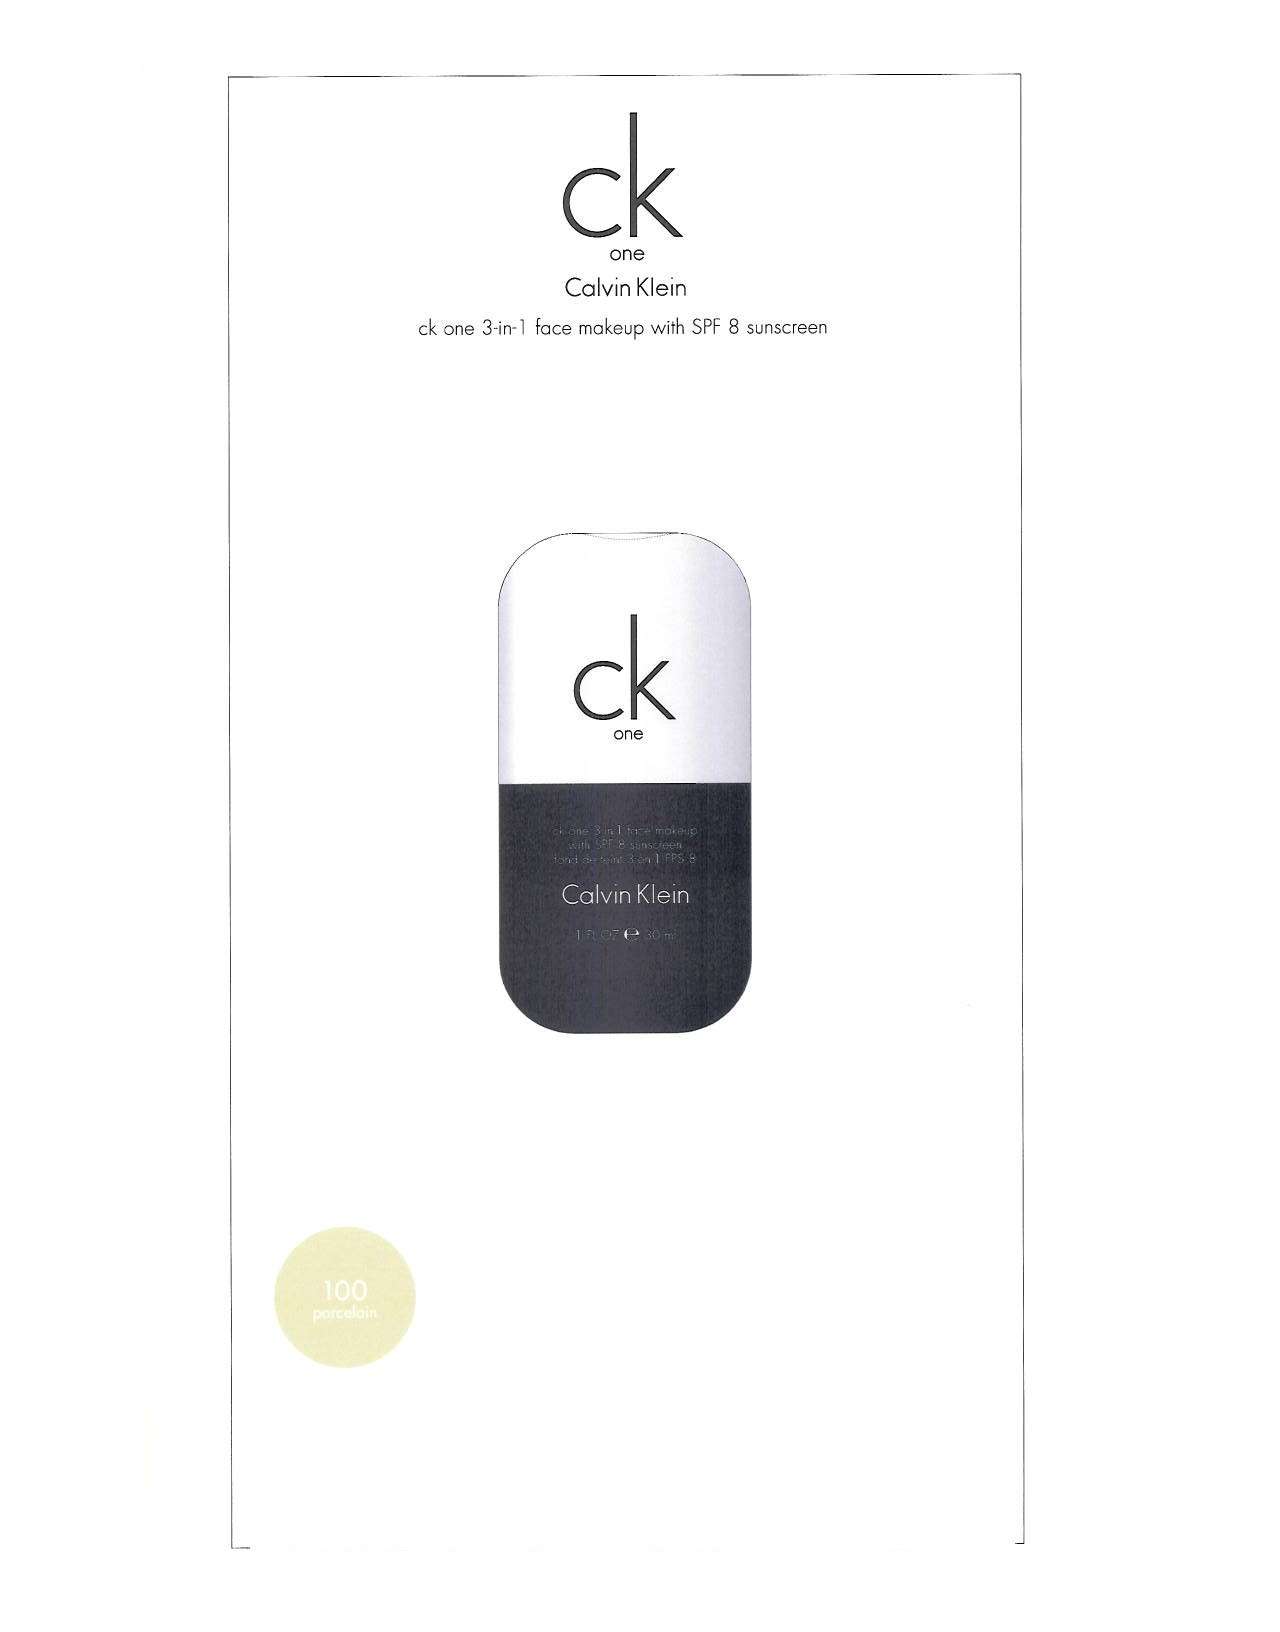 ck one3-in-1face makeup